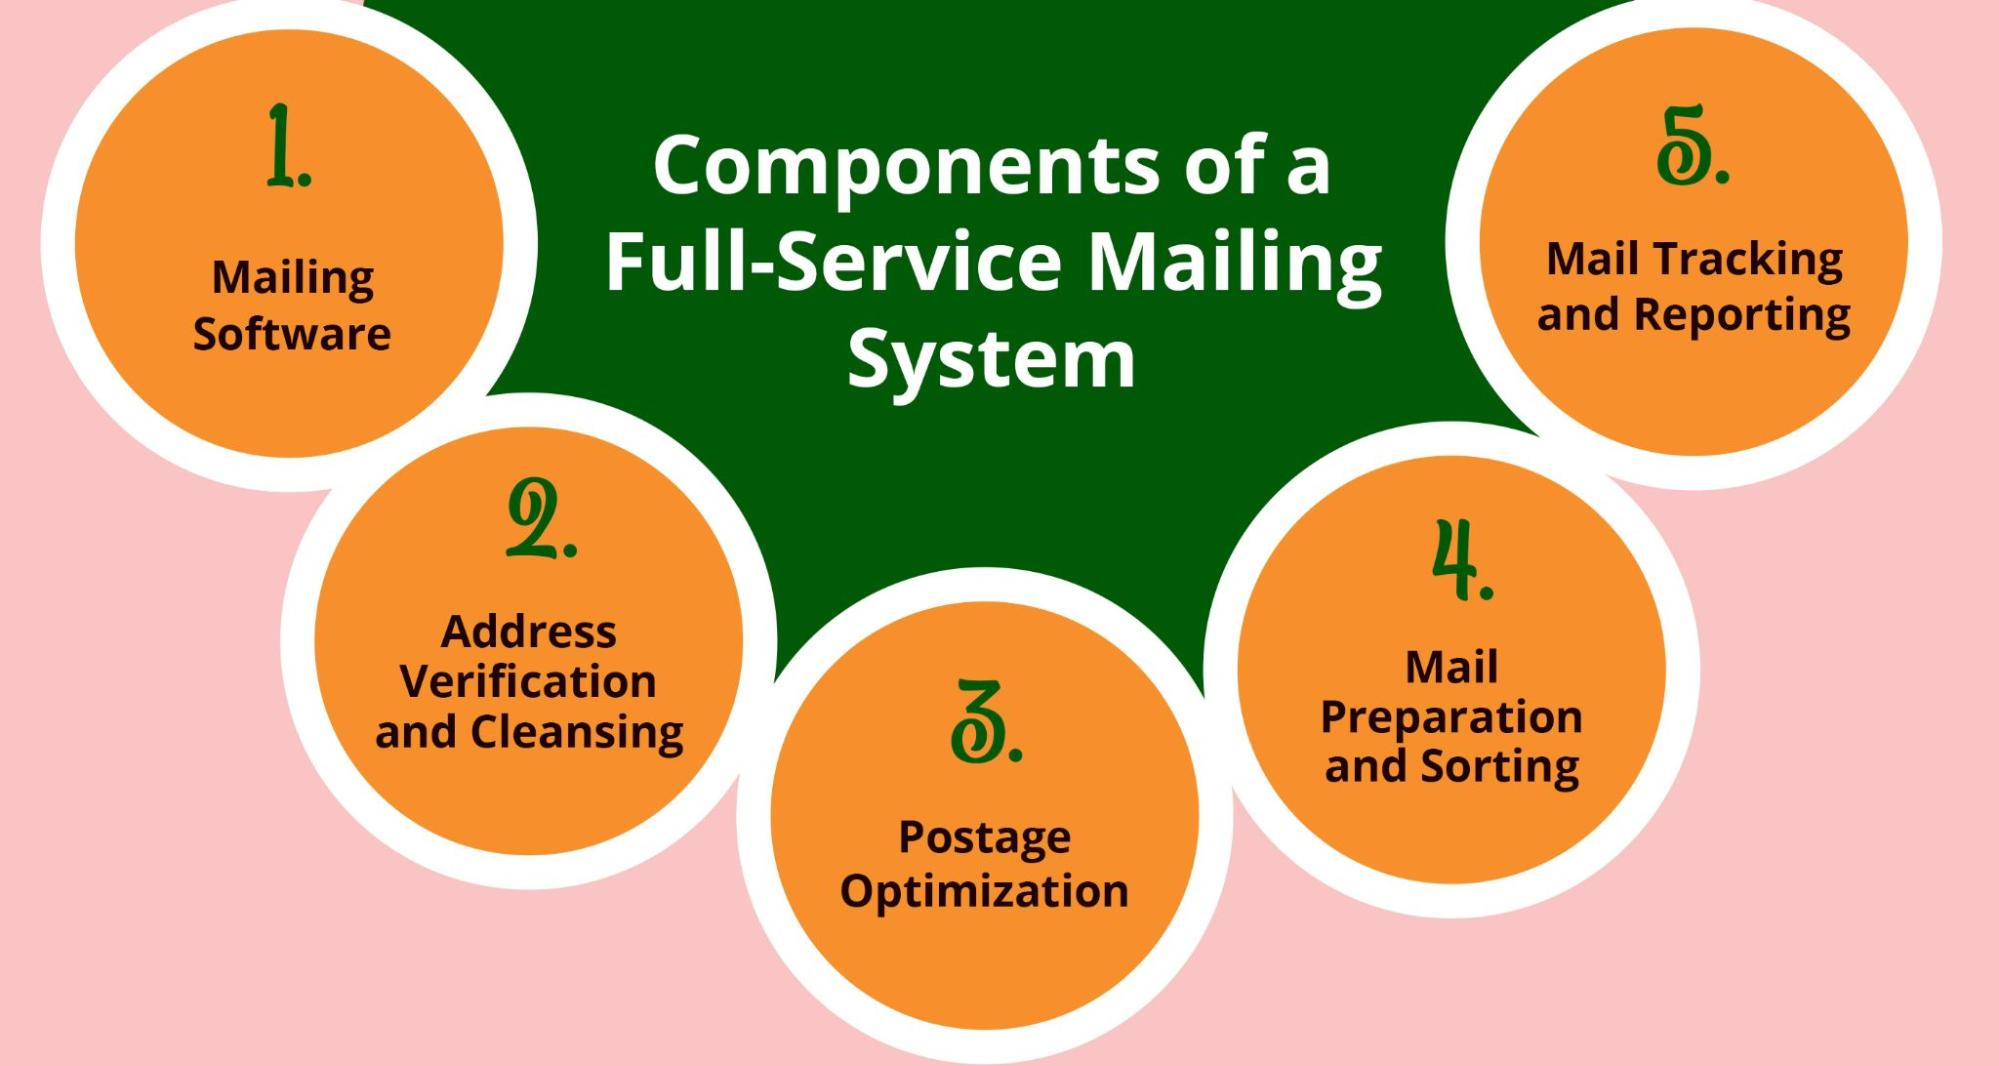 Components of a Full-Service Mailing System